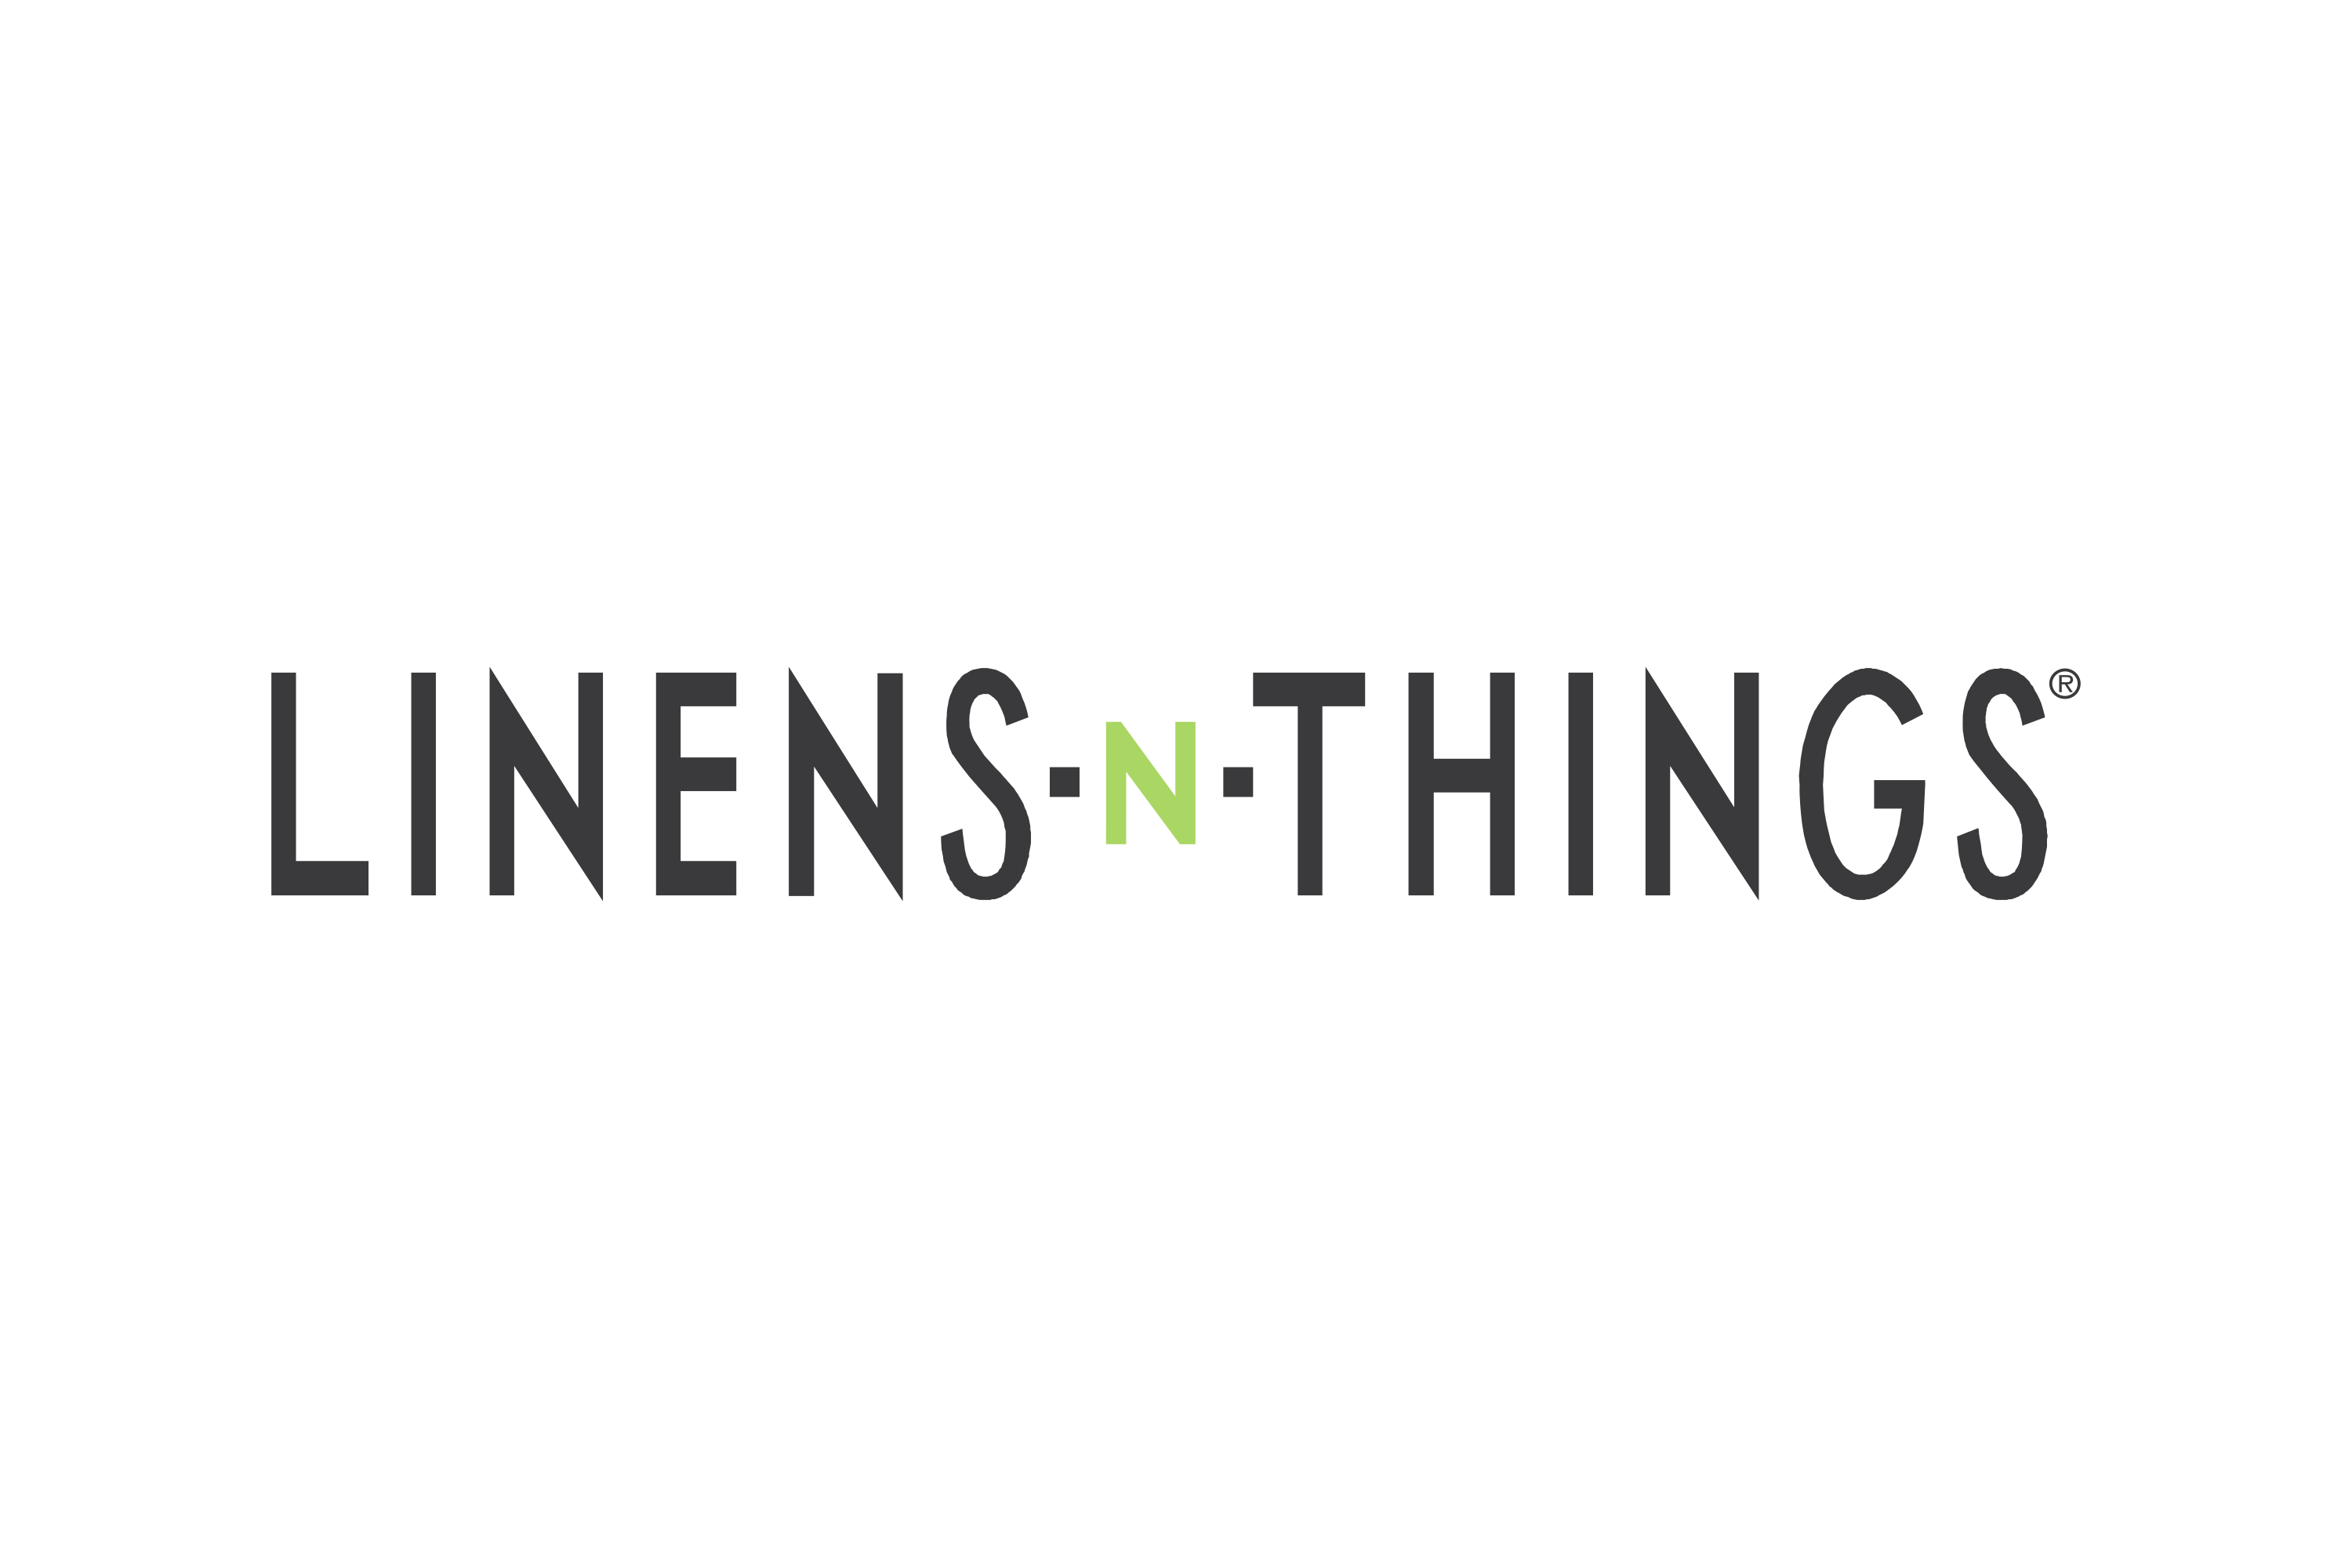 Linens 'n Things coupon codes, promo codes and deals